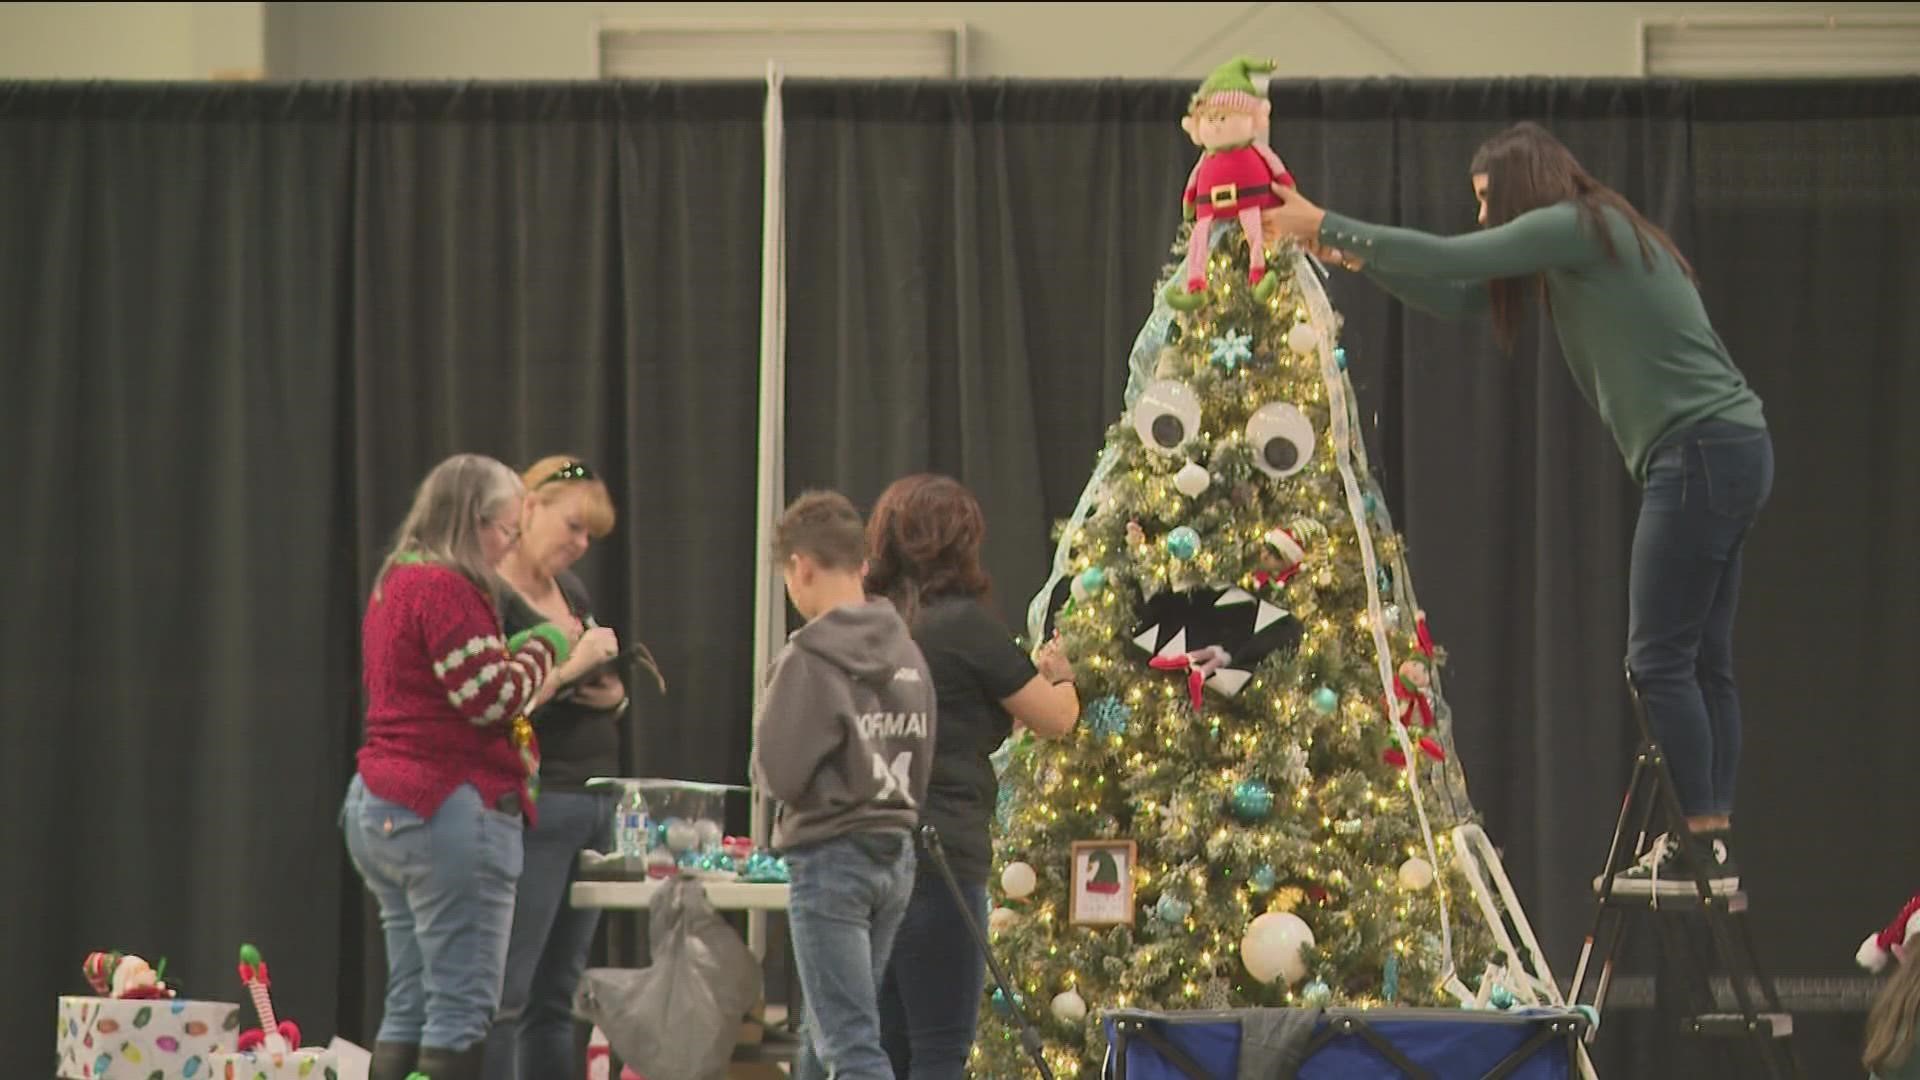 The 2022 Canyon County Festival of Trees returns to the Ford Idaho Center Friday and Saturday. Tickets are $5 for adults, and $3 for children and seniors.